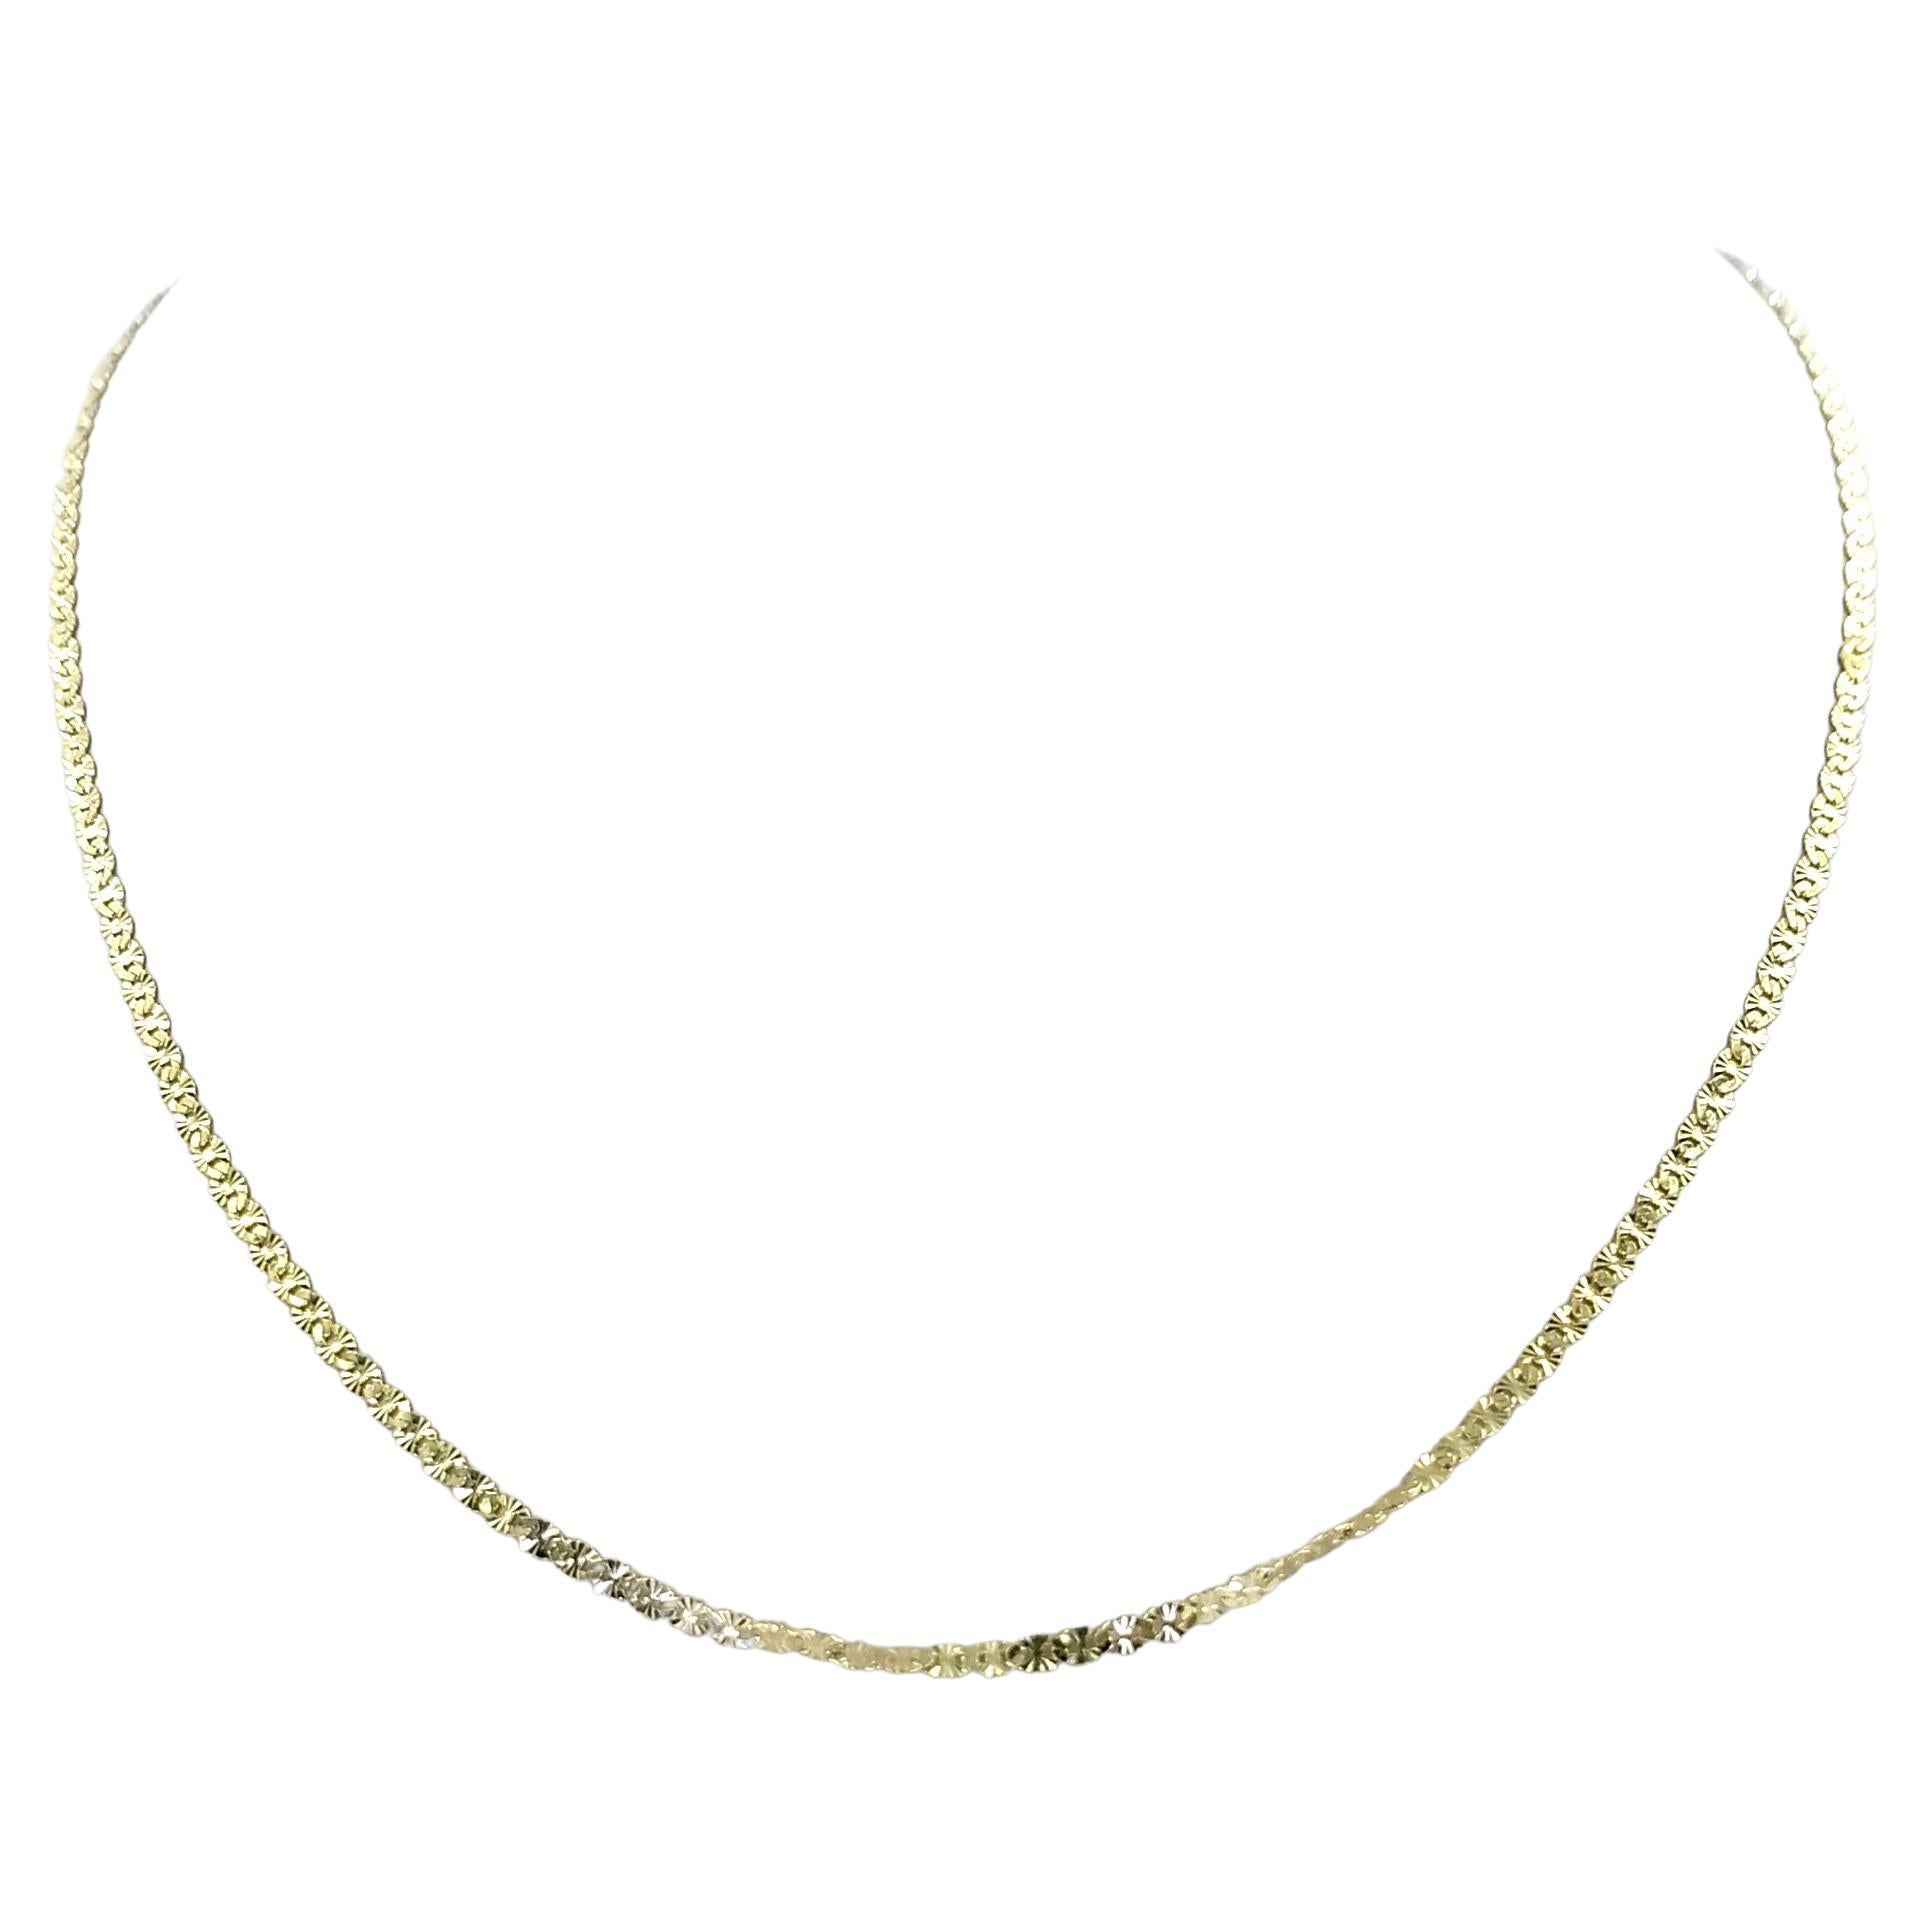 14 Karat Yellow Gold 0.8mm Flat Textured Anchor Link Chain Measuring 18 Inches Long. Finished Weight is 1.7 Grams.